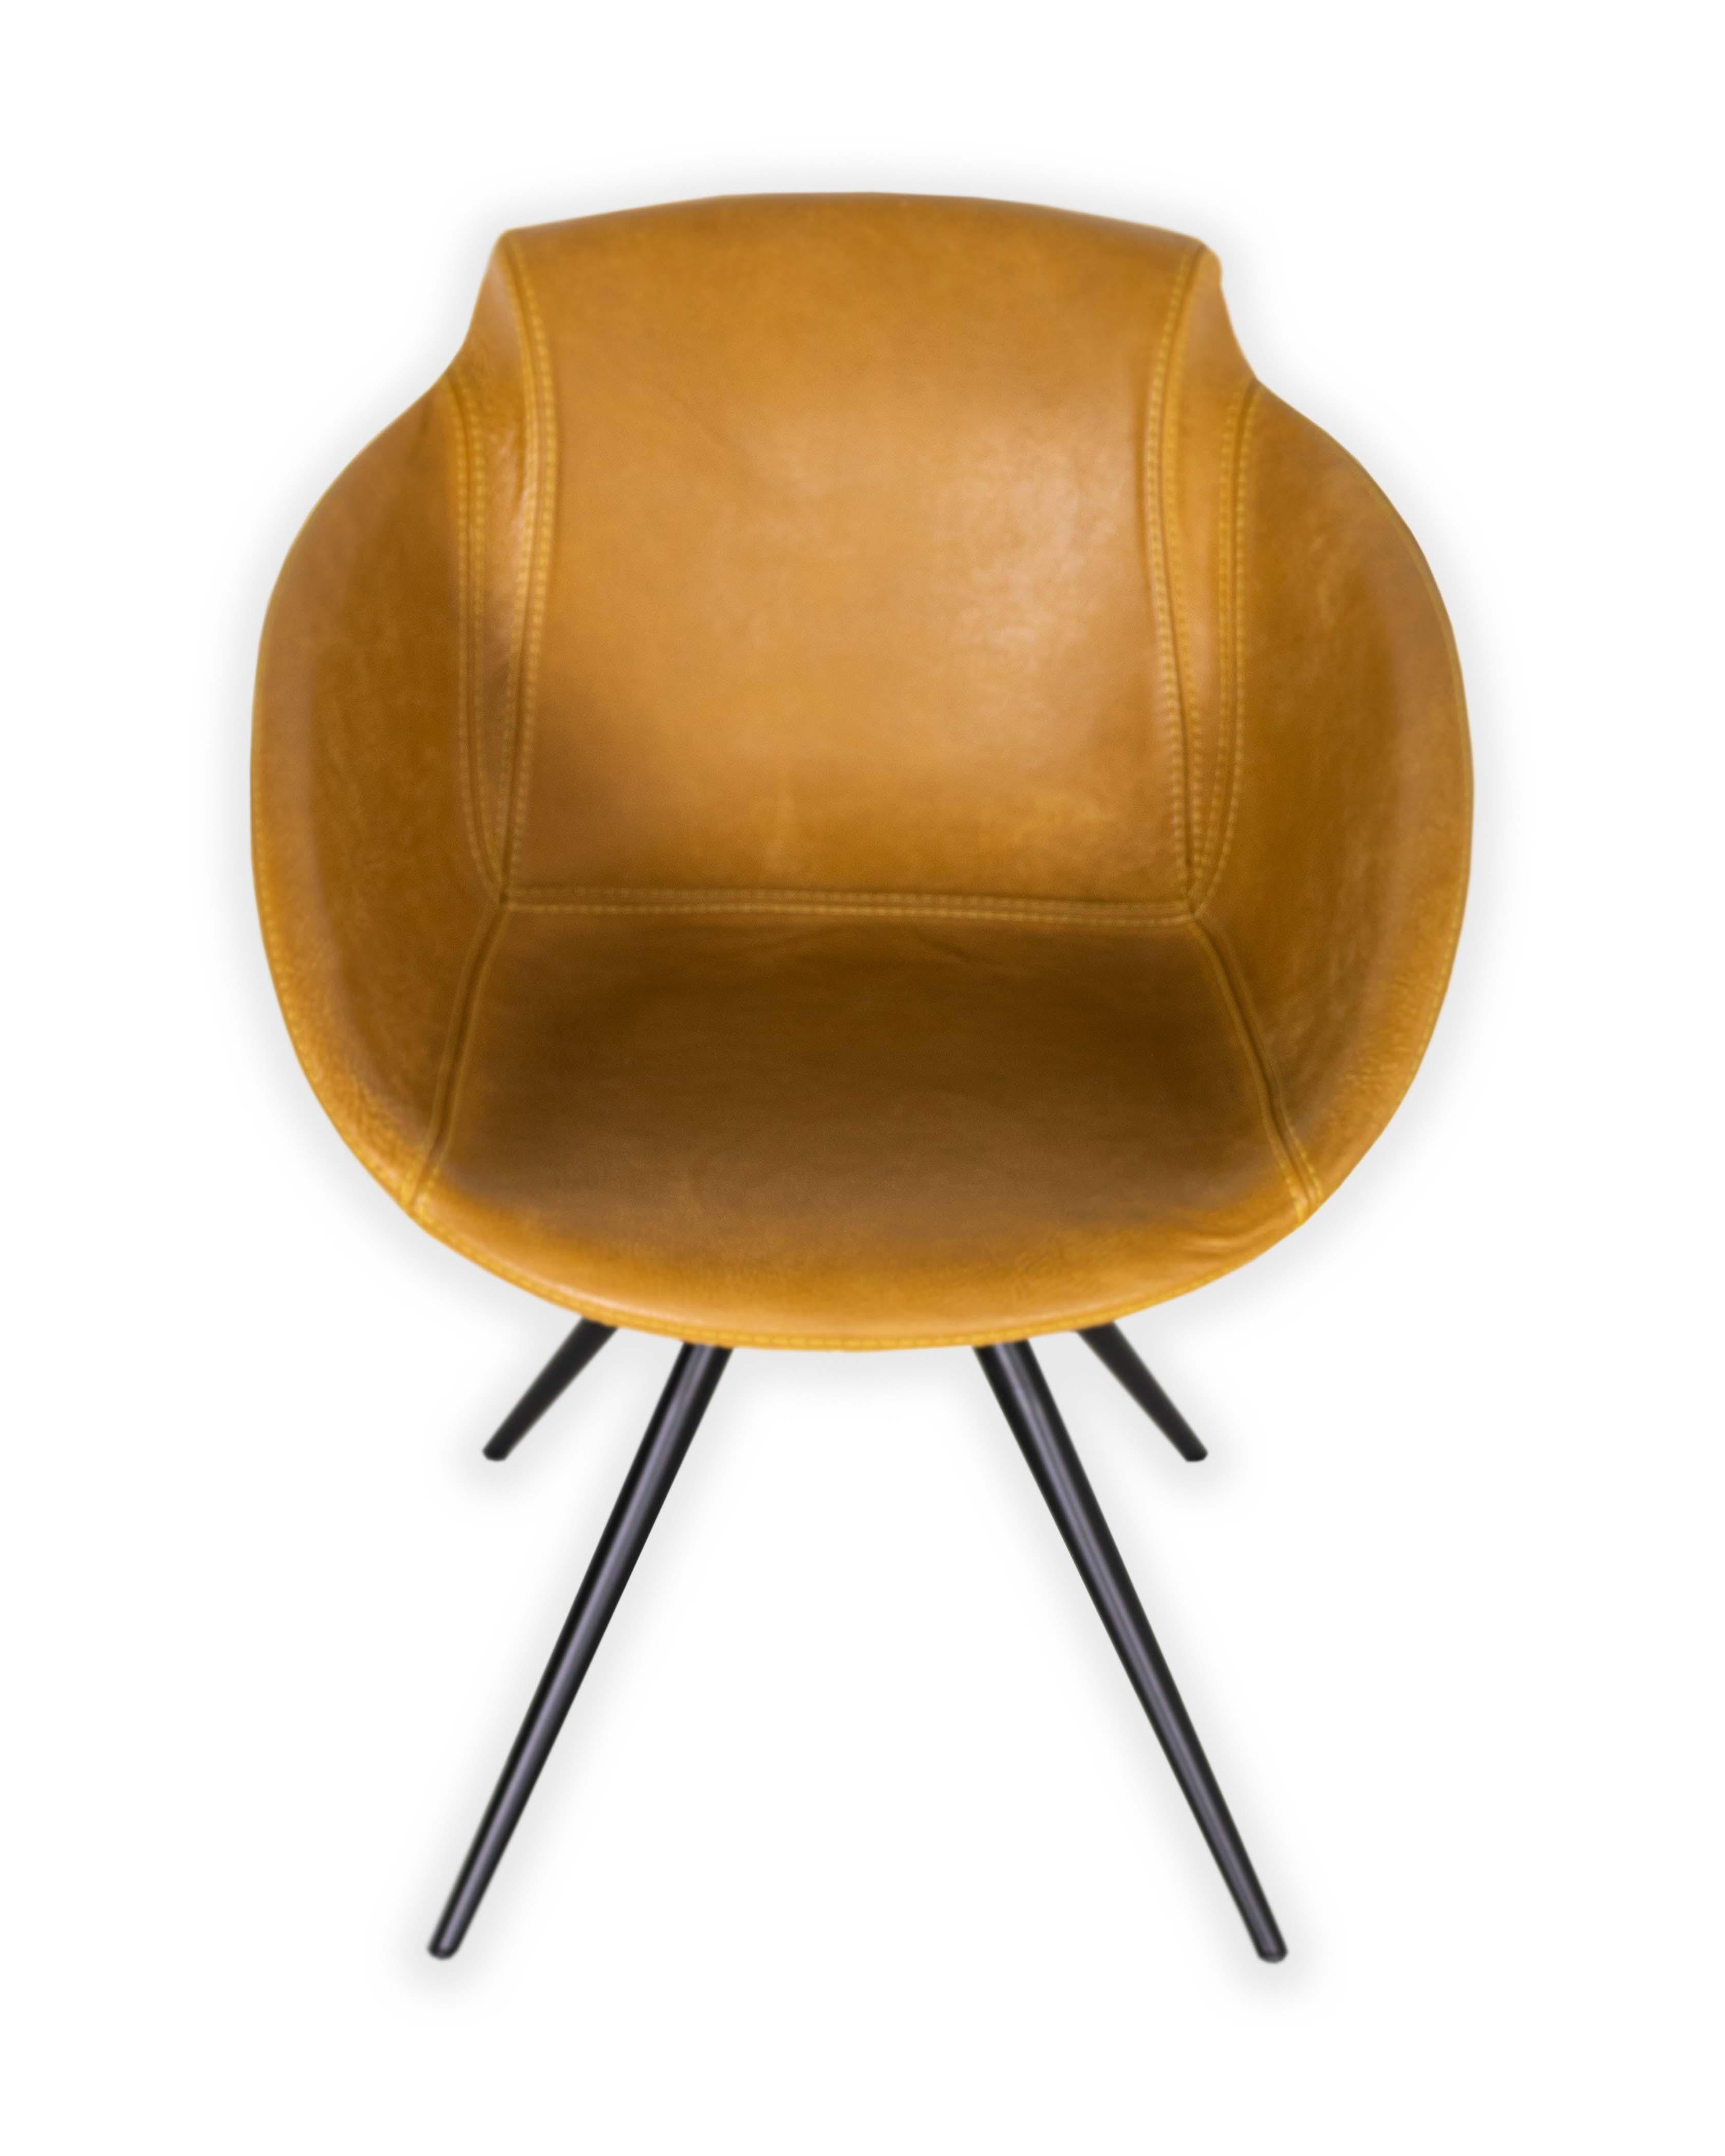 Patinated leather club dining chair. Mustard coloring. 

Part of our Le Monde collection. Exclusive to Brendan Bass.